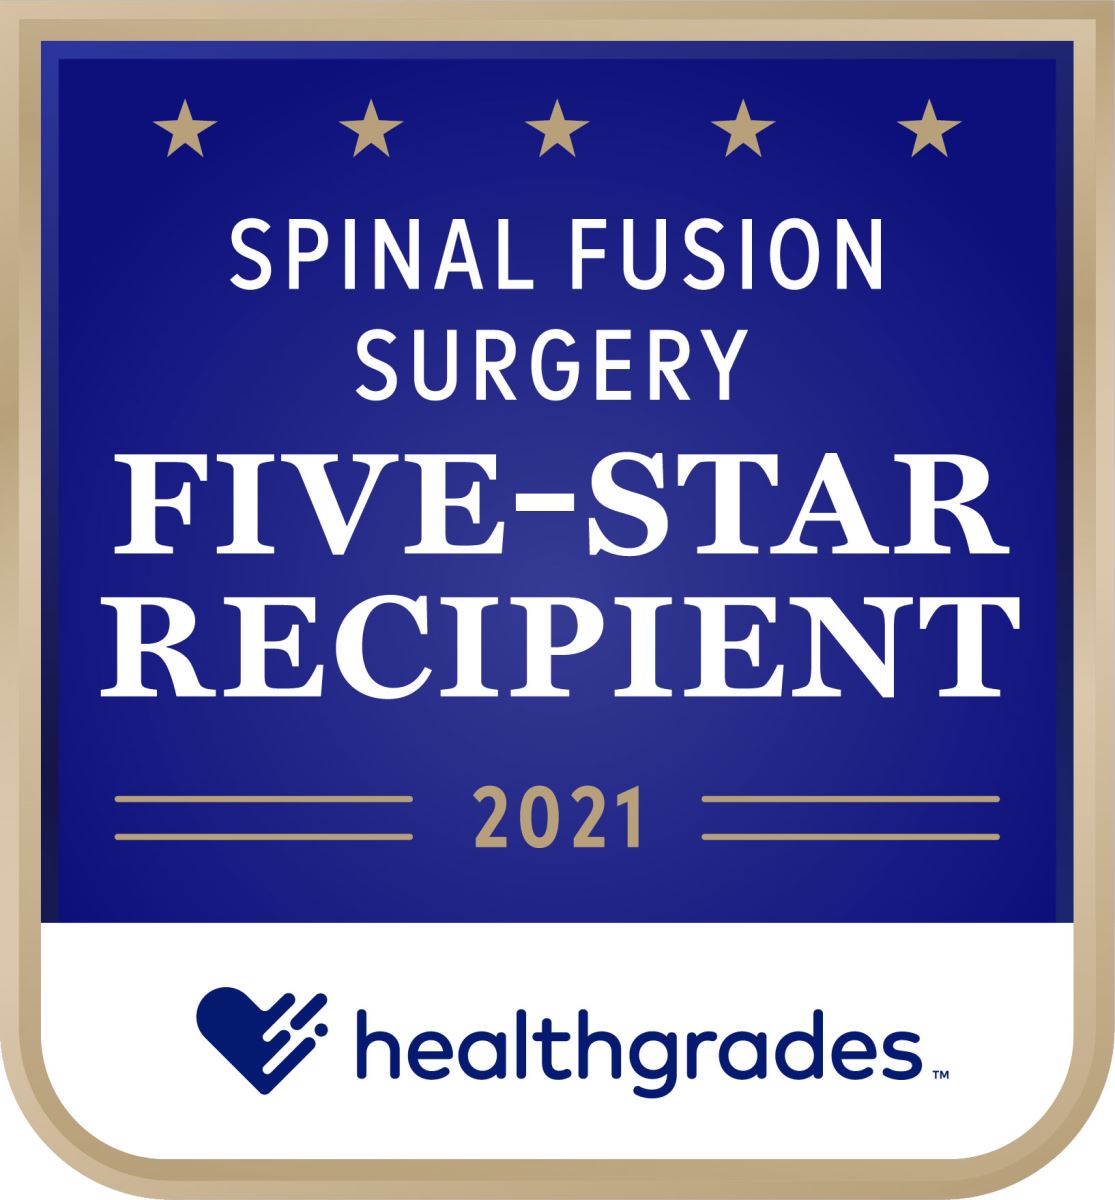 Spinal Fusion Surgery Five-Star Recipient 2021